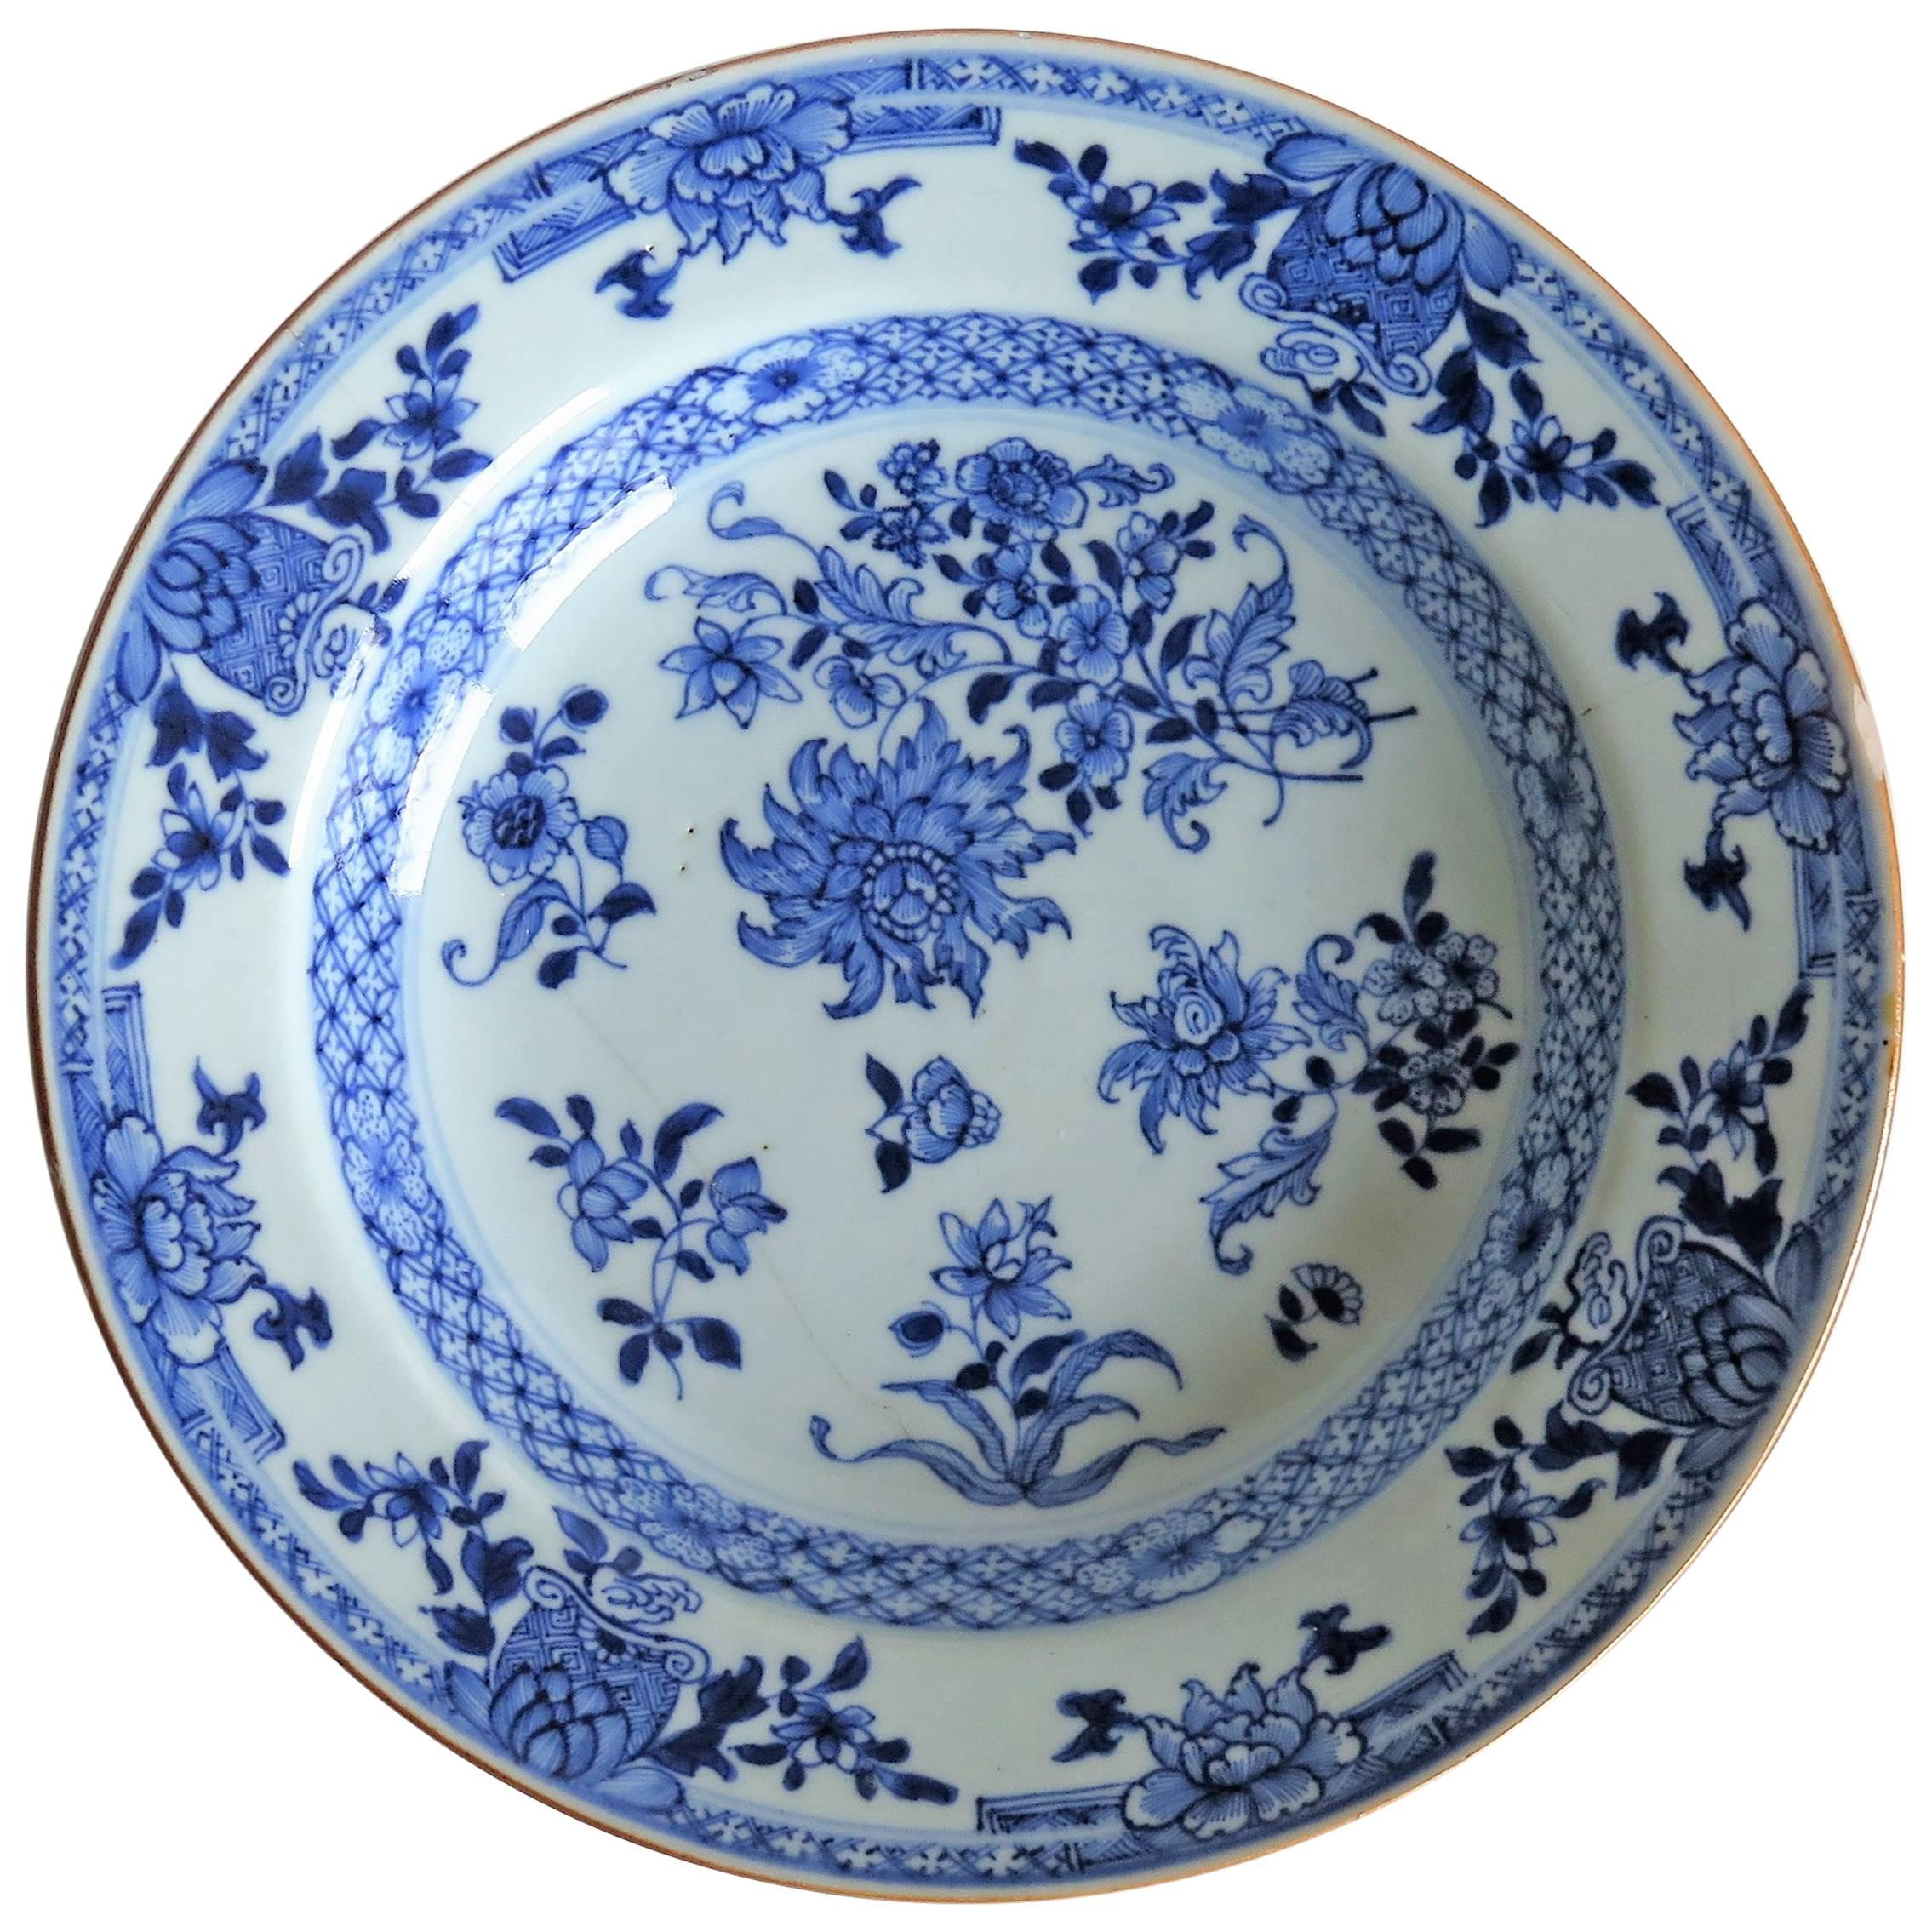 Chinese Porcelain Plate or Bowl, Blue and White, Floral Sprigs, circa 1770